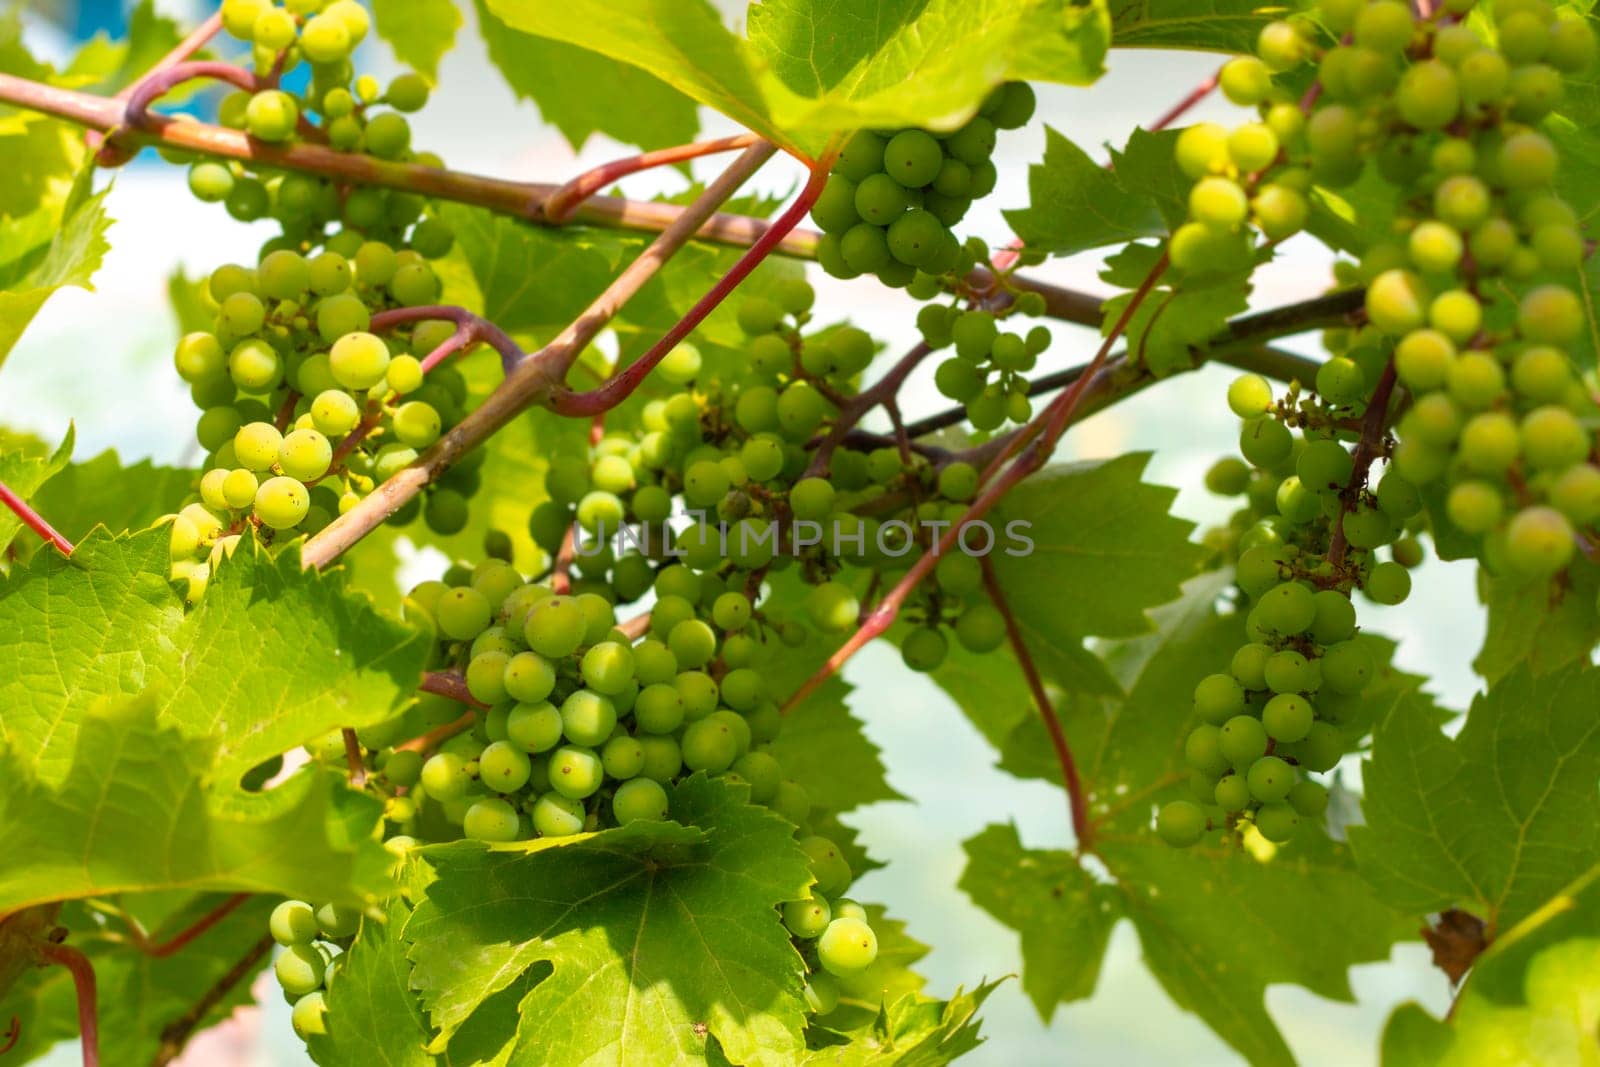 Unripe green wine grapes growing on plantt. Natural grape hanging and ripening on branch